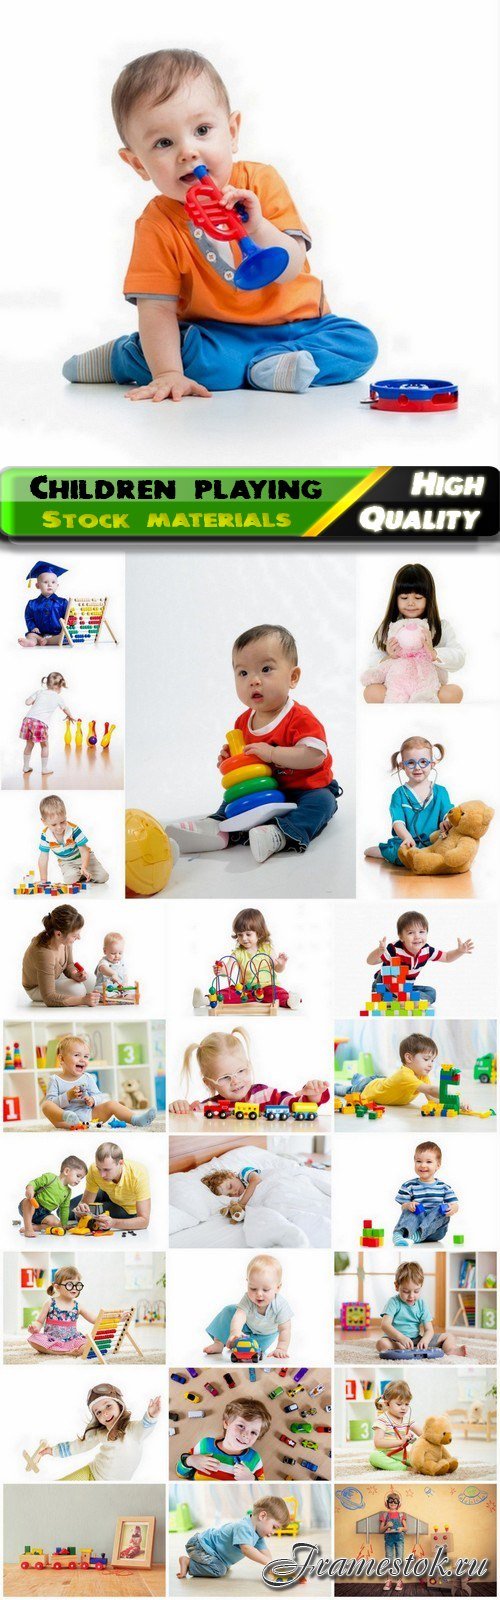 Happy children playing with toys - 25 HQ Jpg